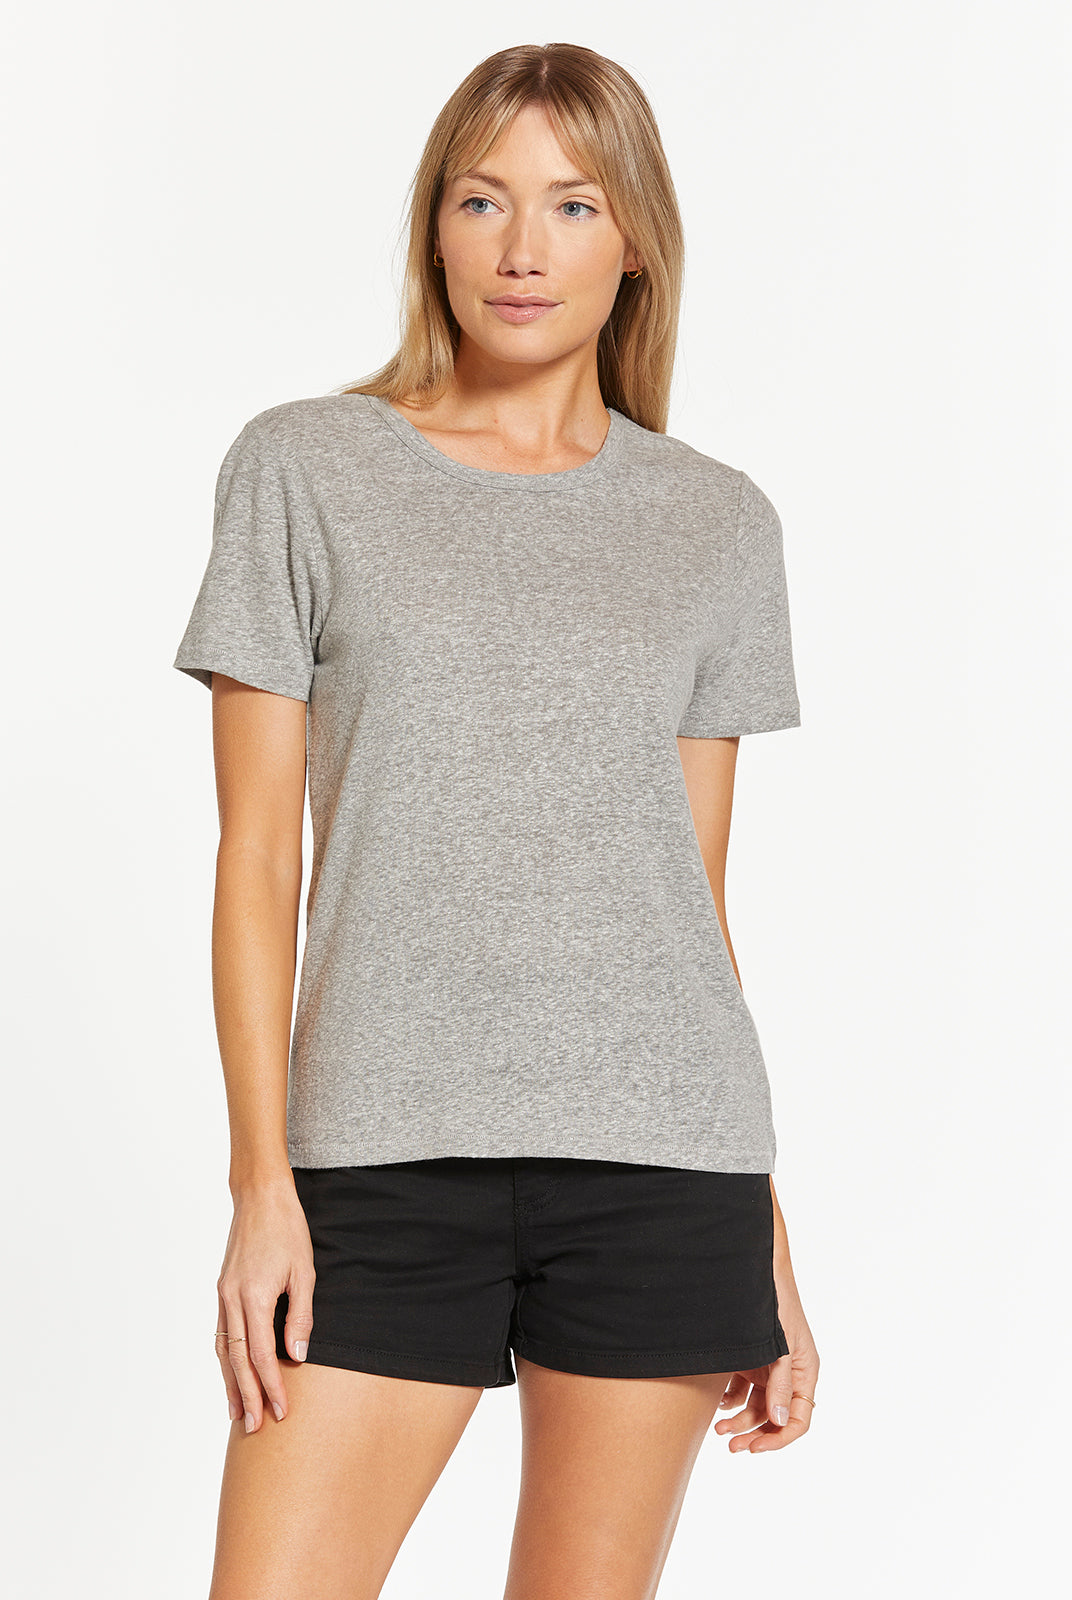 Heather Grey Short Sleeve Top Apex Ethical Boutique